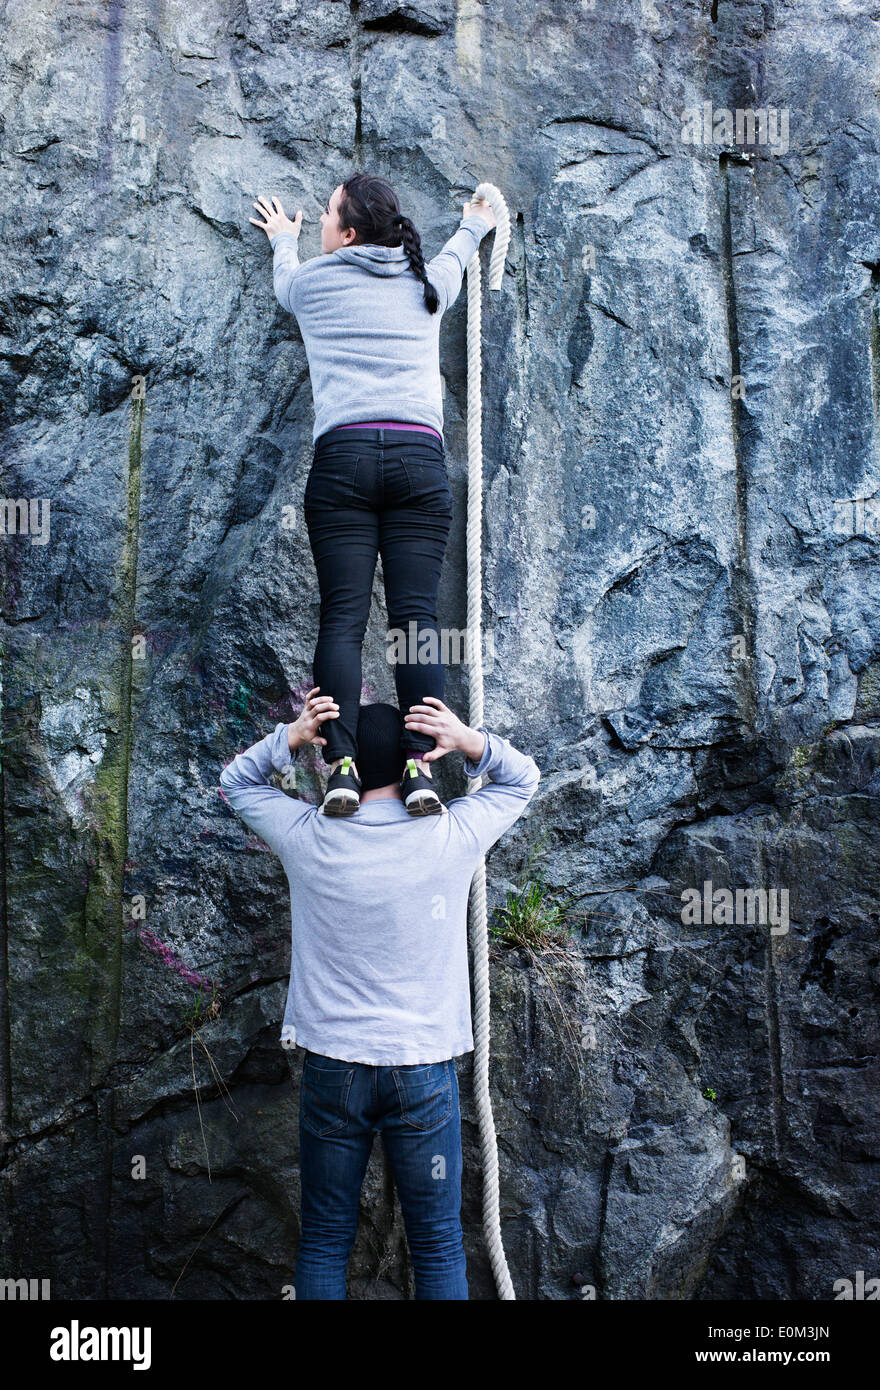 Woman standing on shoulders of man in front of mountain wall with rope in hand. Looking for a way to climb up. Stock Photo